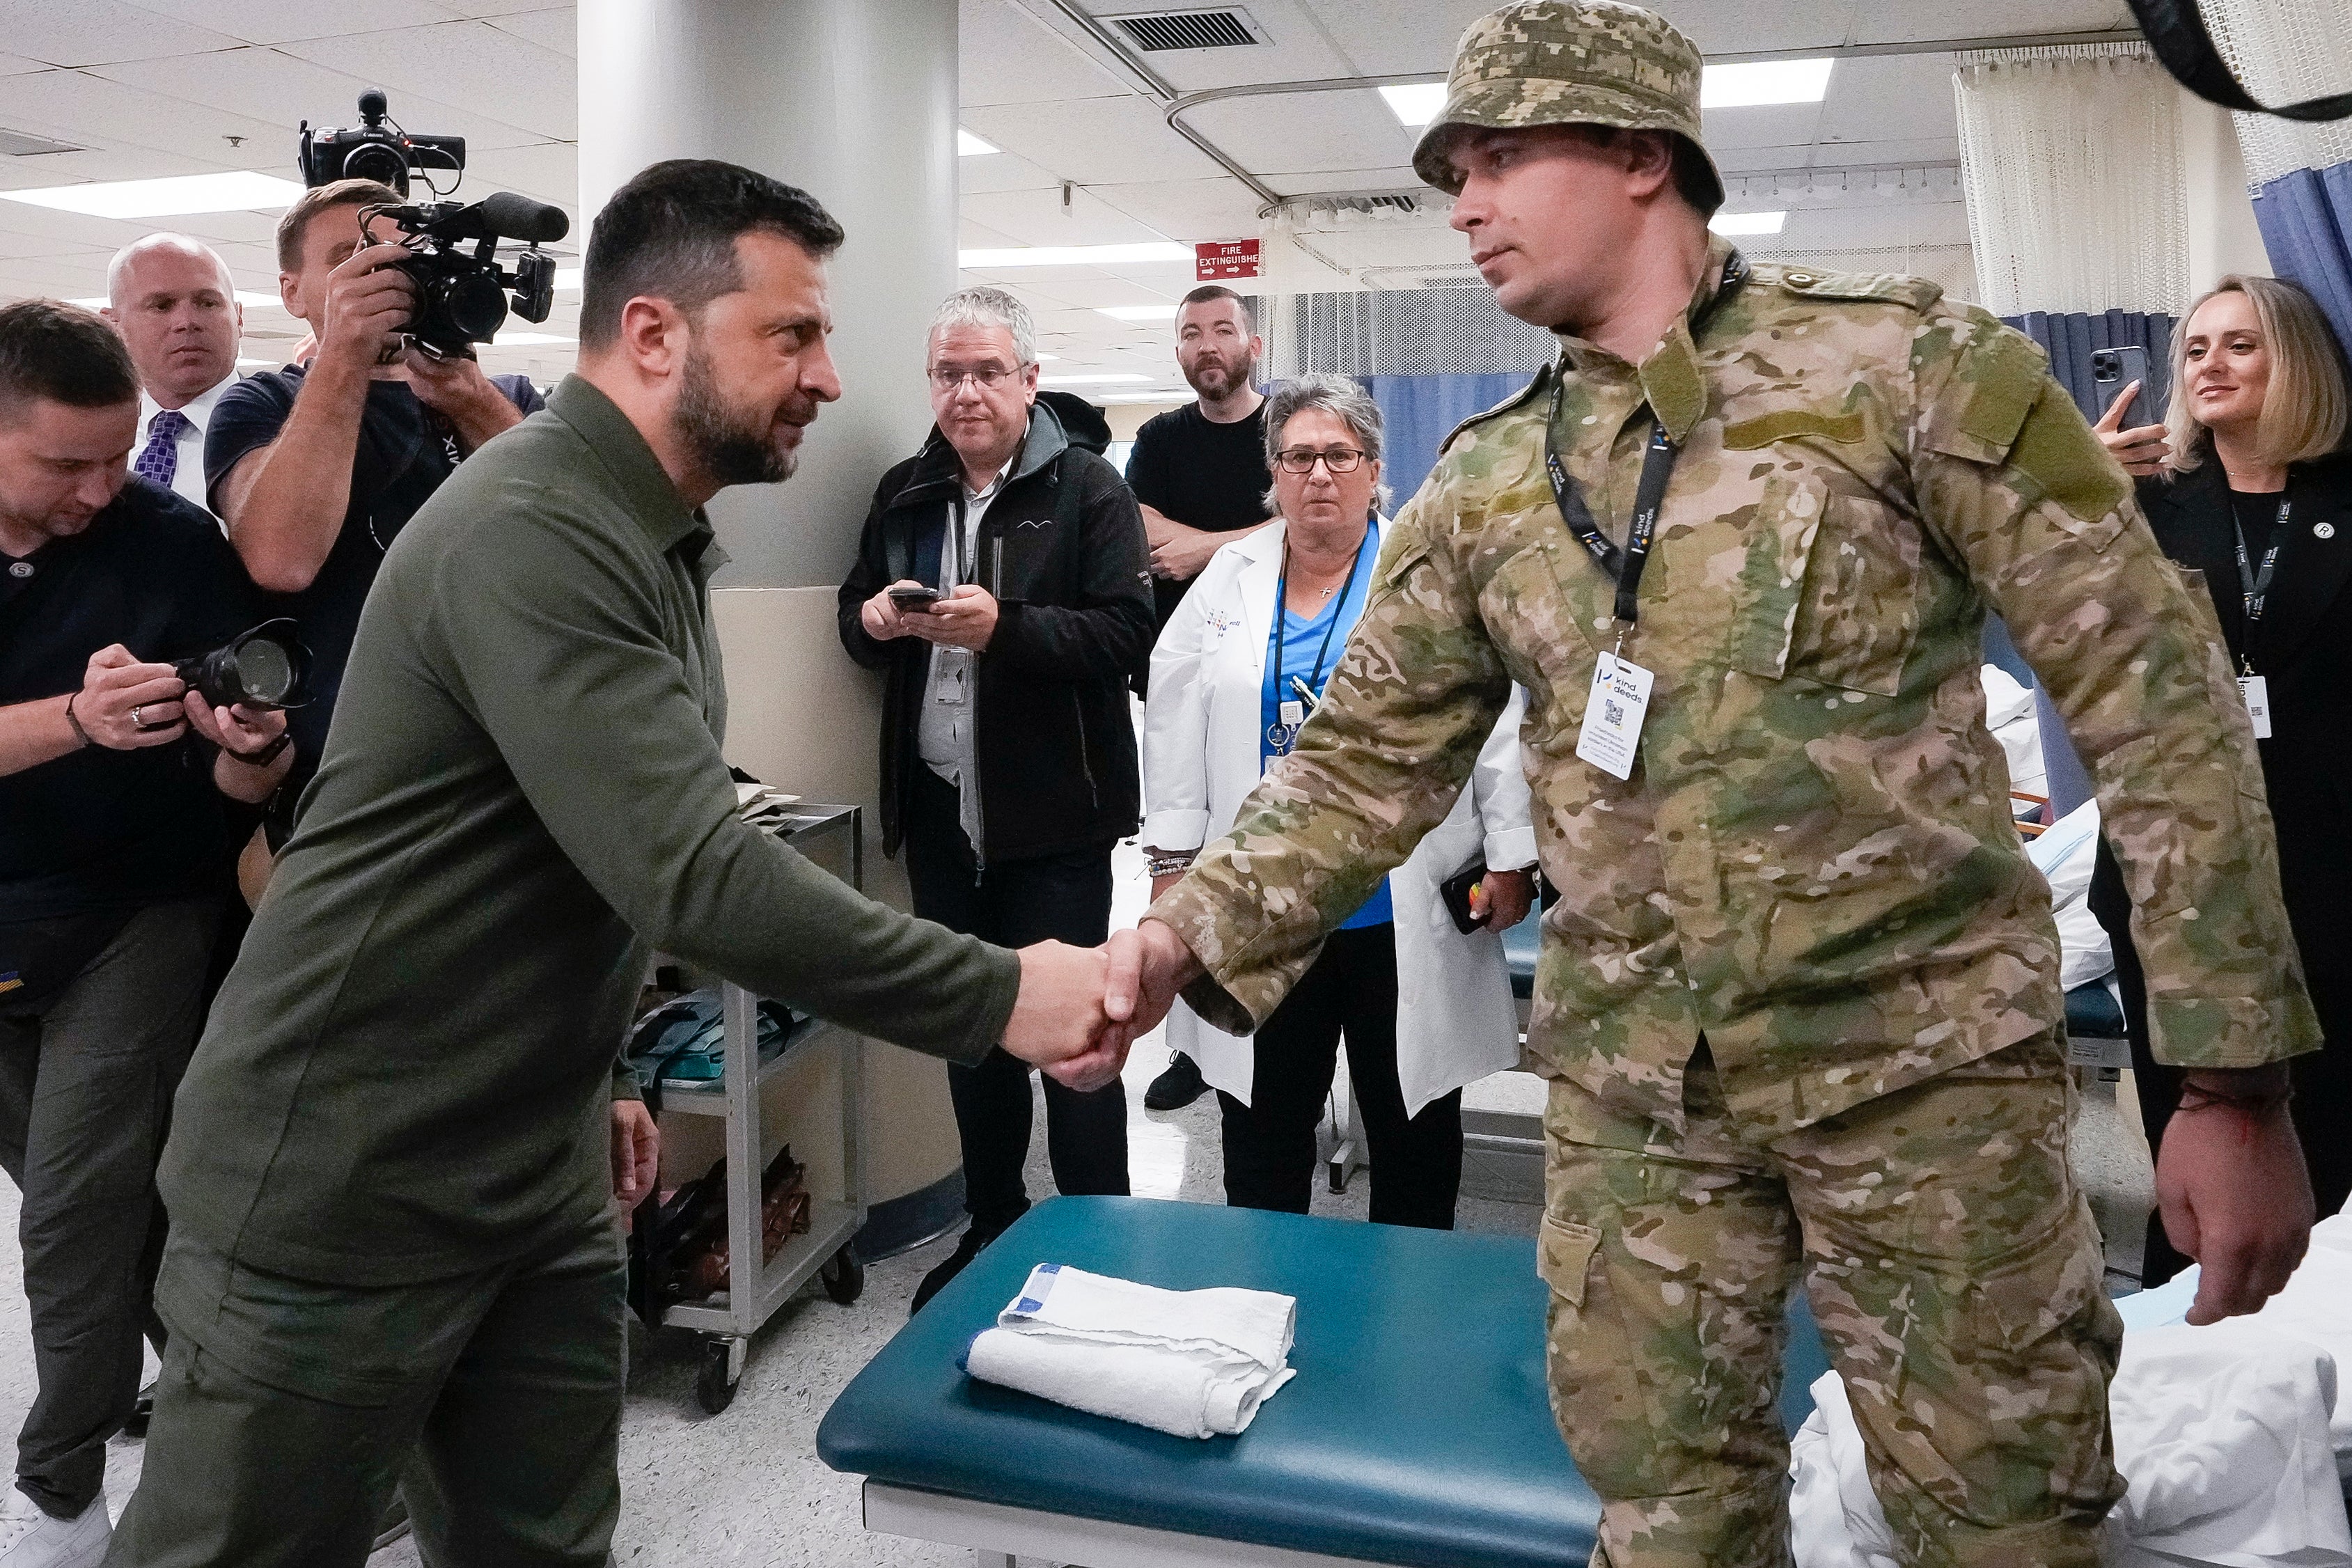 Zelensky visited a hospital where he awarded medals to Ukrainian military members who had lost limbs